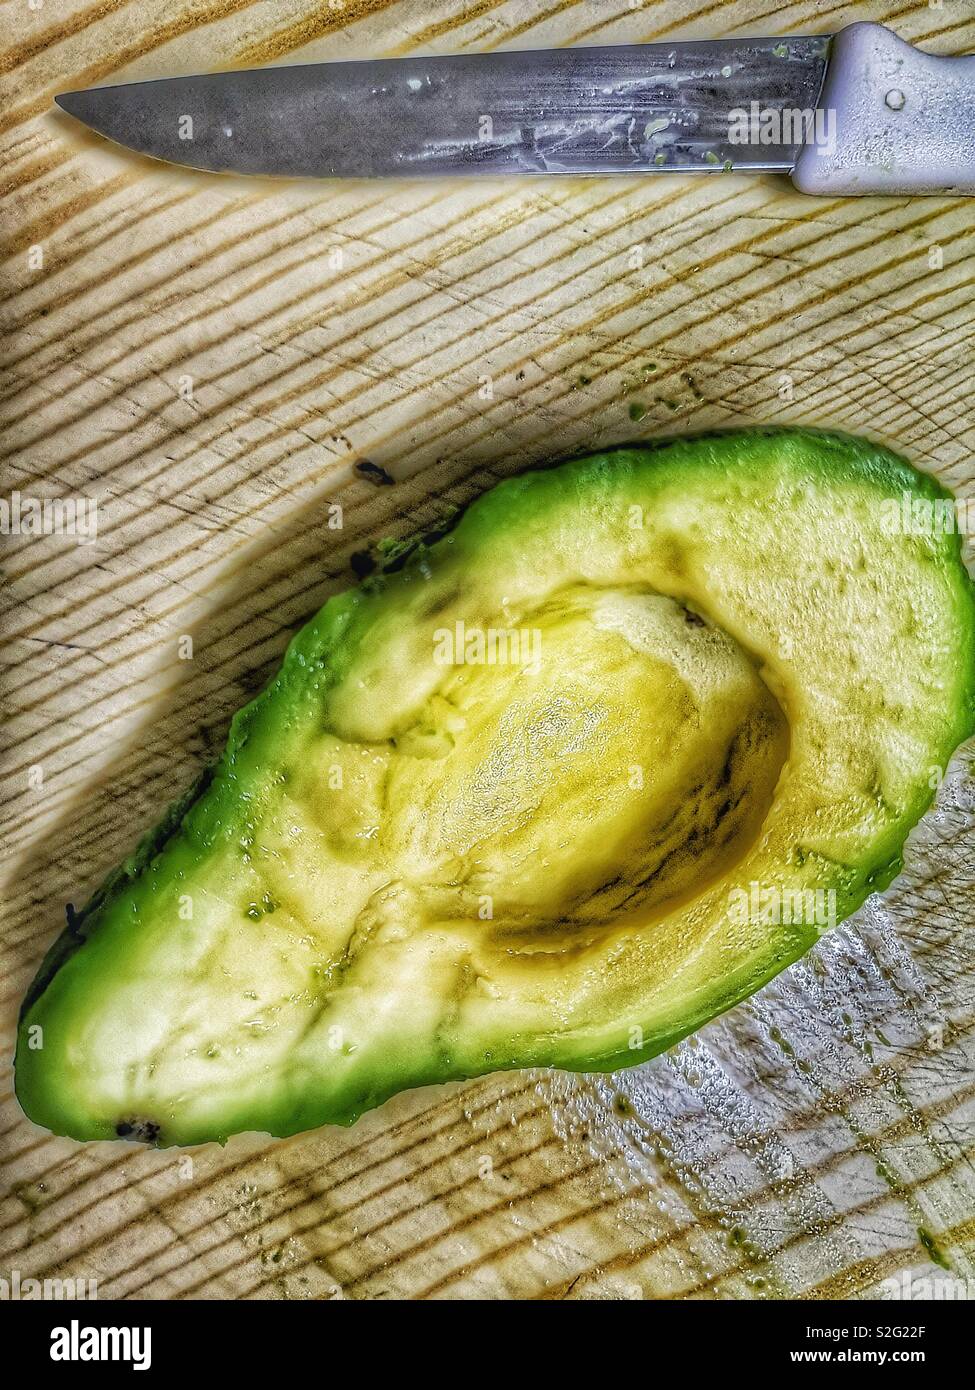 Half avocado with knife on chopping board view from above Stock Photo